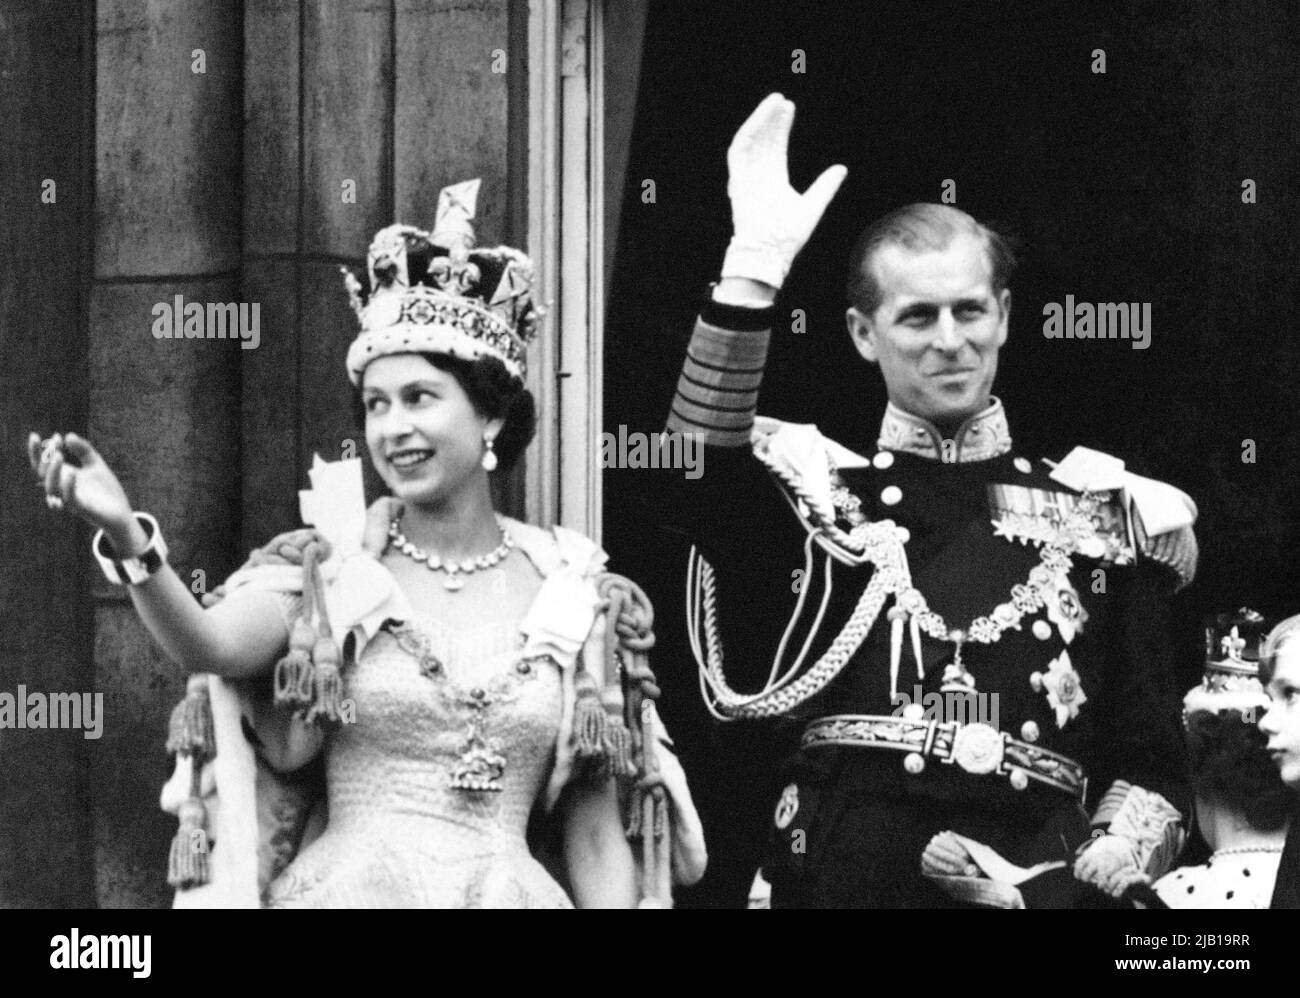 File photo dated 2/6/1953 of Queen Elizabeth II, wearing the Imperial State Crown, and the Duke of Edinburgh, dressed in uniform of Admiral of the Fleet, wave from the balcony to the onlooking crowds at the gates of Buckingham Palace after the Coronation. The start of the Queen's Jubilee celebrations falls on a significant anniversary for the monarch - her Coronation Day. Sixty nine years ago, Elizabeth II was crowned in religious ceremony staged on June 2 1953 in the historic surrounds of Westminster Abbey and celebrated with street parties across the country. Issue date: Thursday June 2, 202 Stock Photo